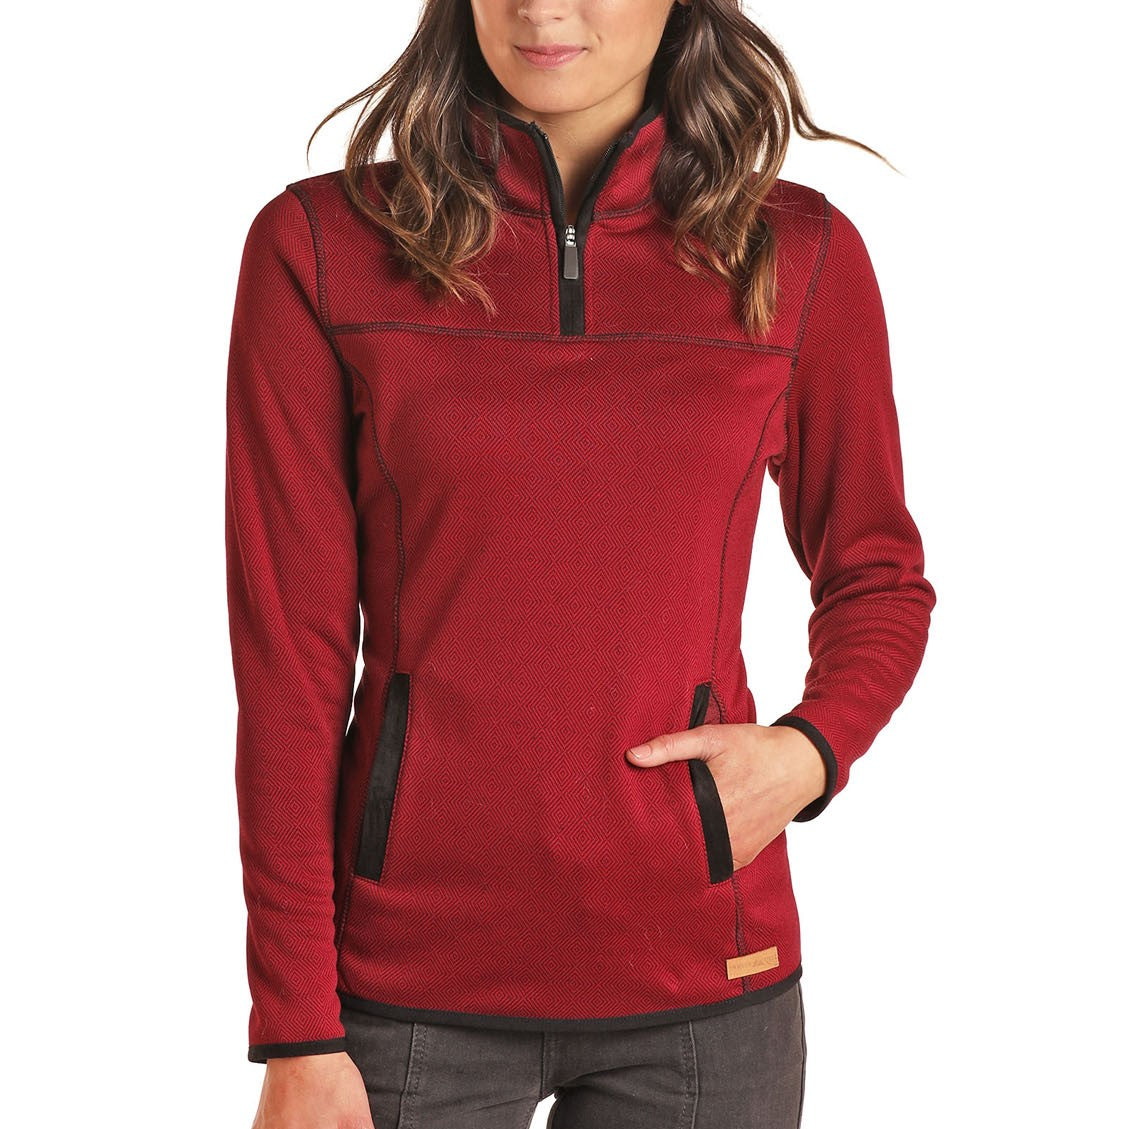 Powder River Outfitters Ladies Jacquared Burgundy Pullover 51-1051